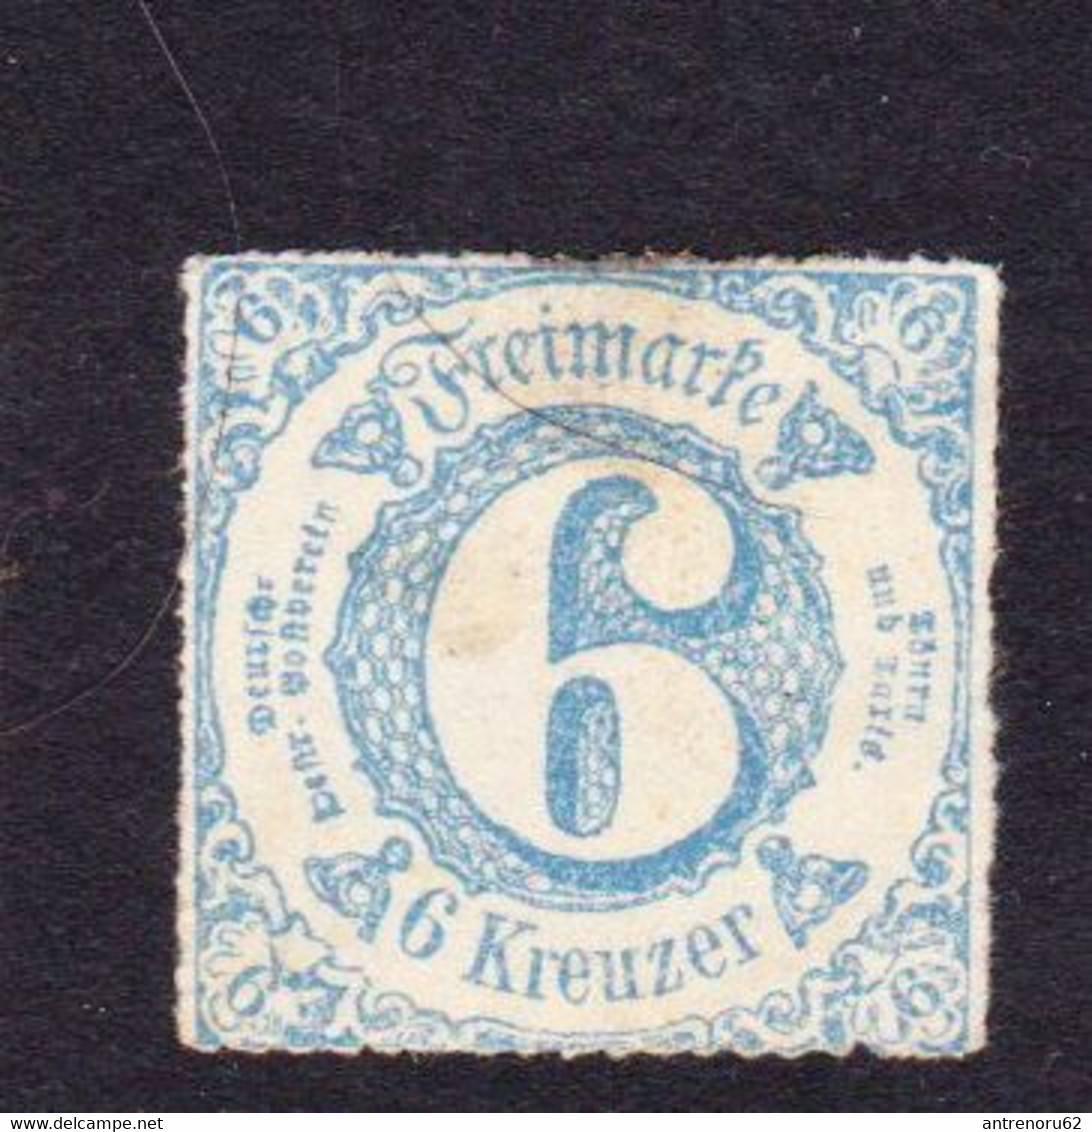 STAMPS-THURN-AND-TAXIS-1865-UNUSED-MH*-SEE-SCAN - Neufs